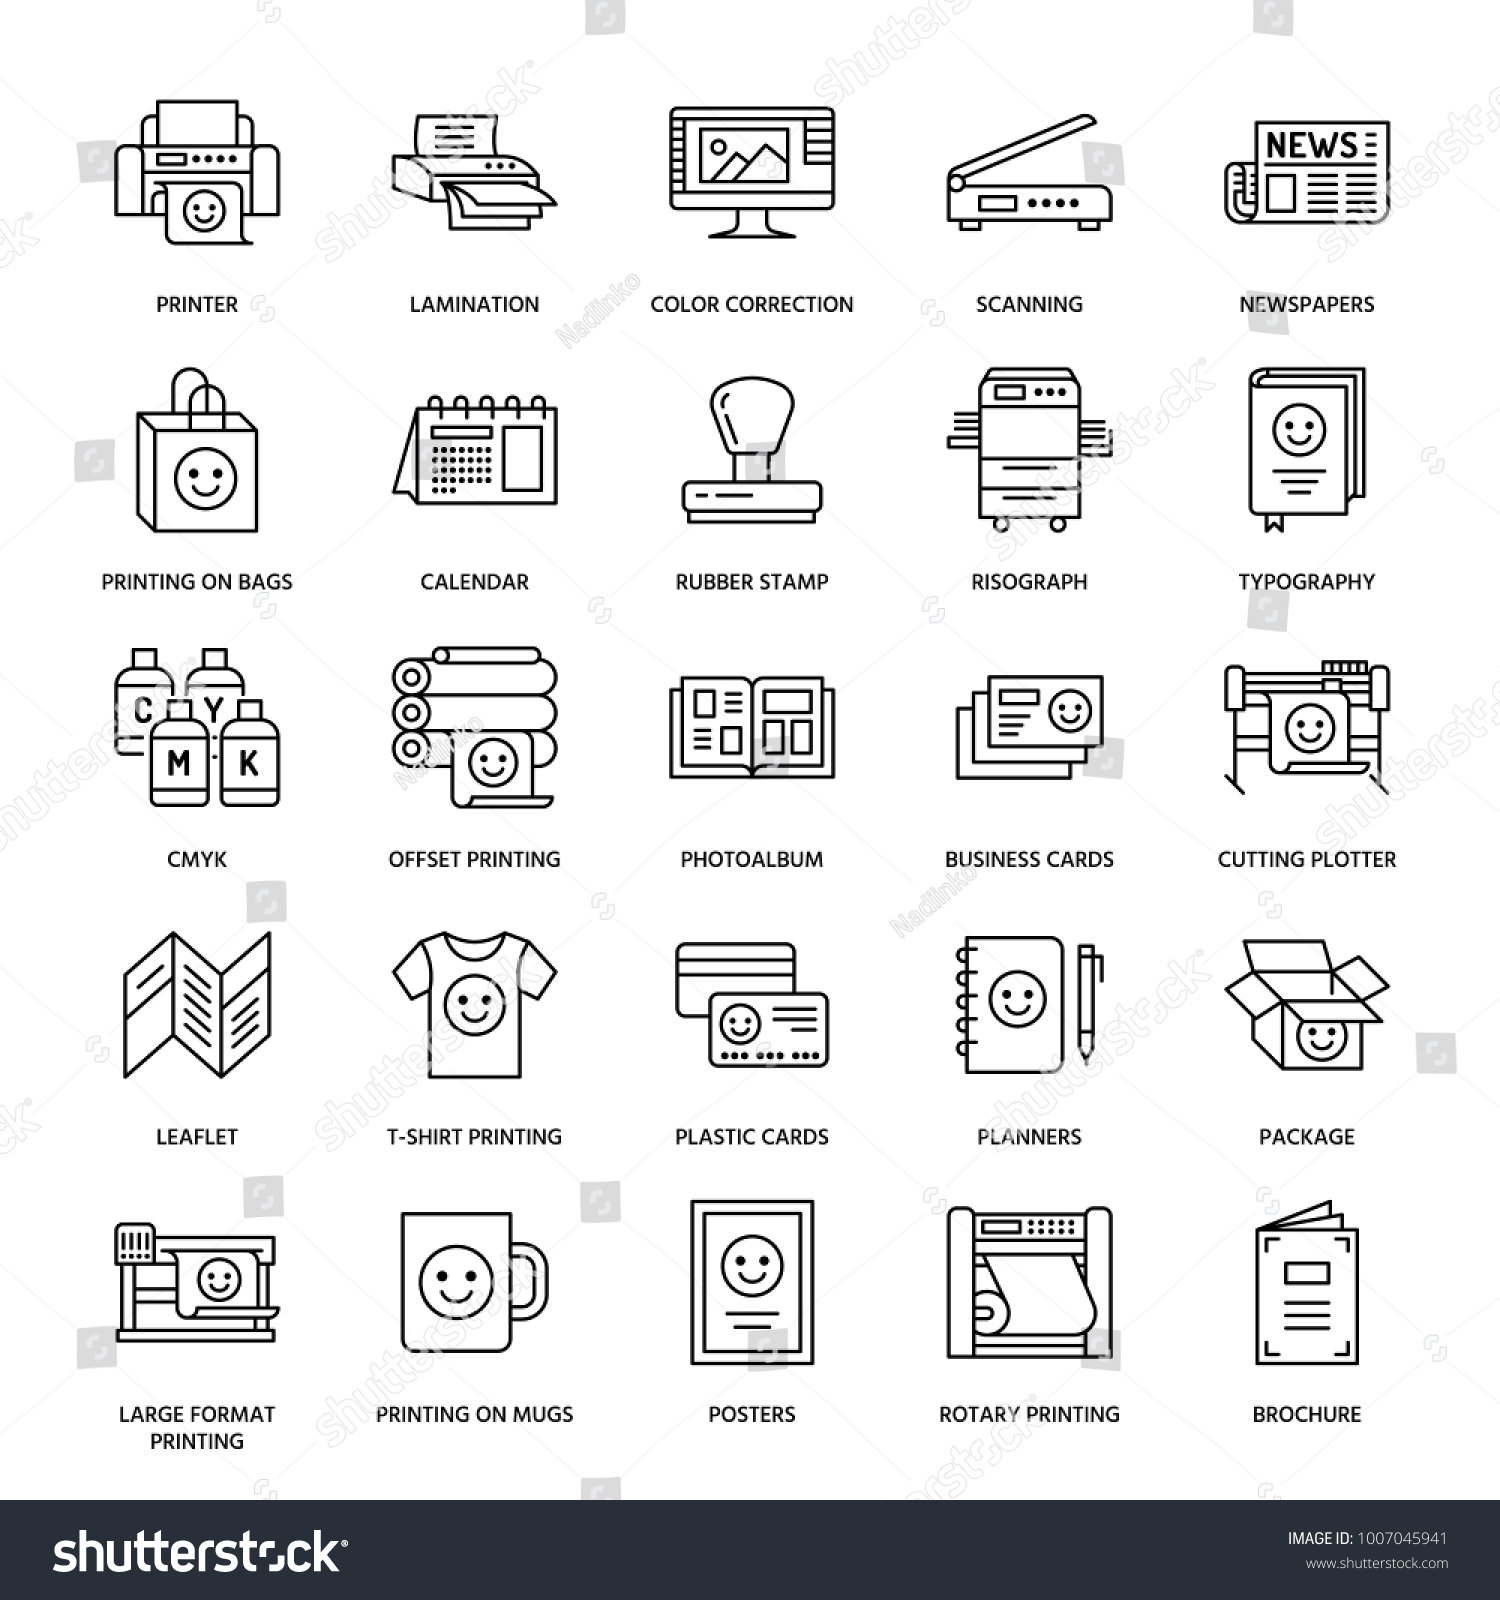 SVG of Printing house flat line icons. Print shop equipment - printer, scanner, offset machine, plotter, brochure, rubber stamp. Thin linear signs for polygraphy office, typography. svg